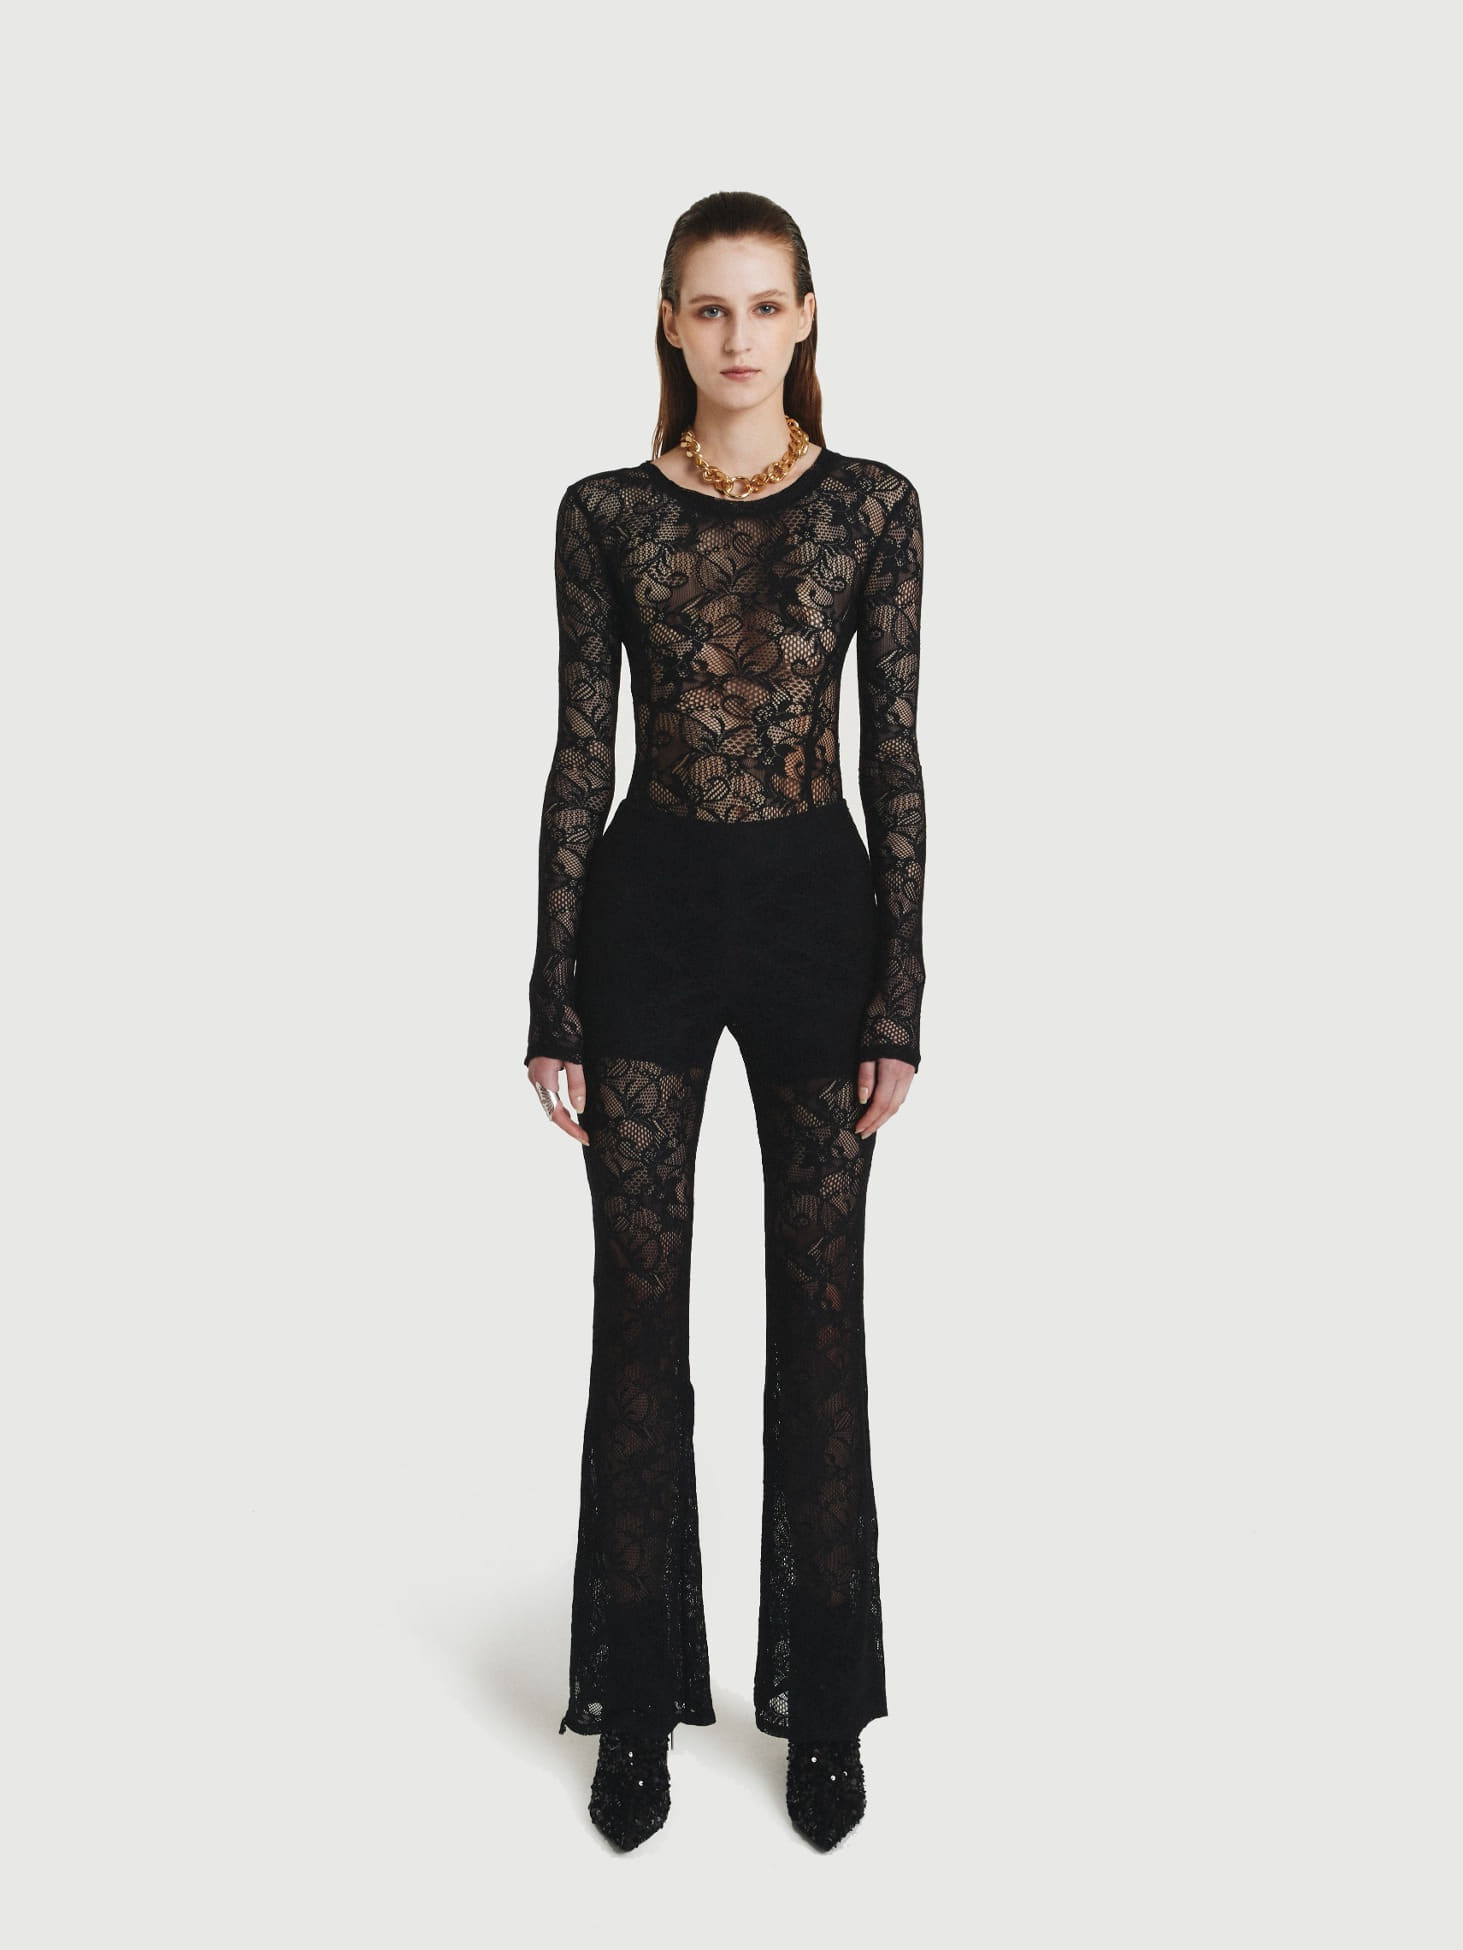 Lace Embroidery Leggings / Black